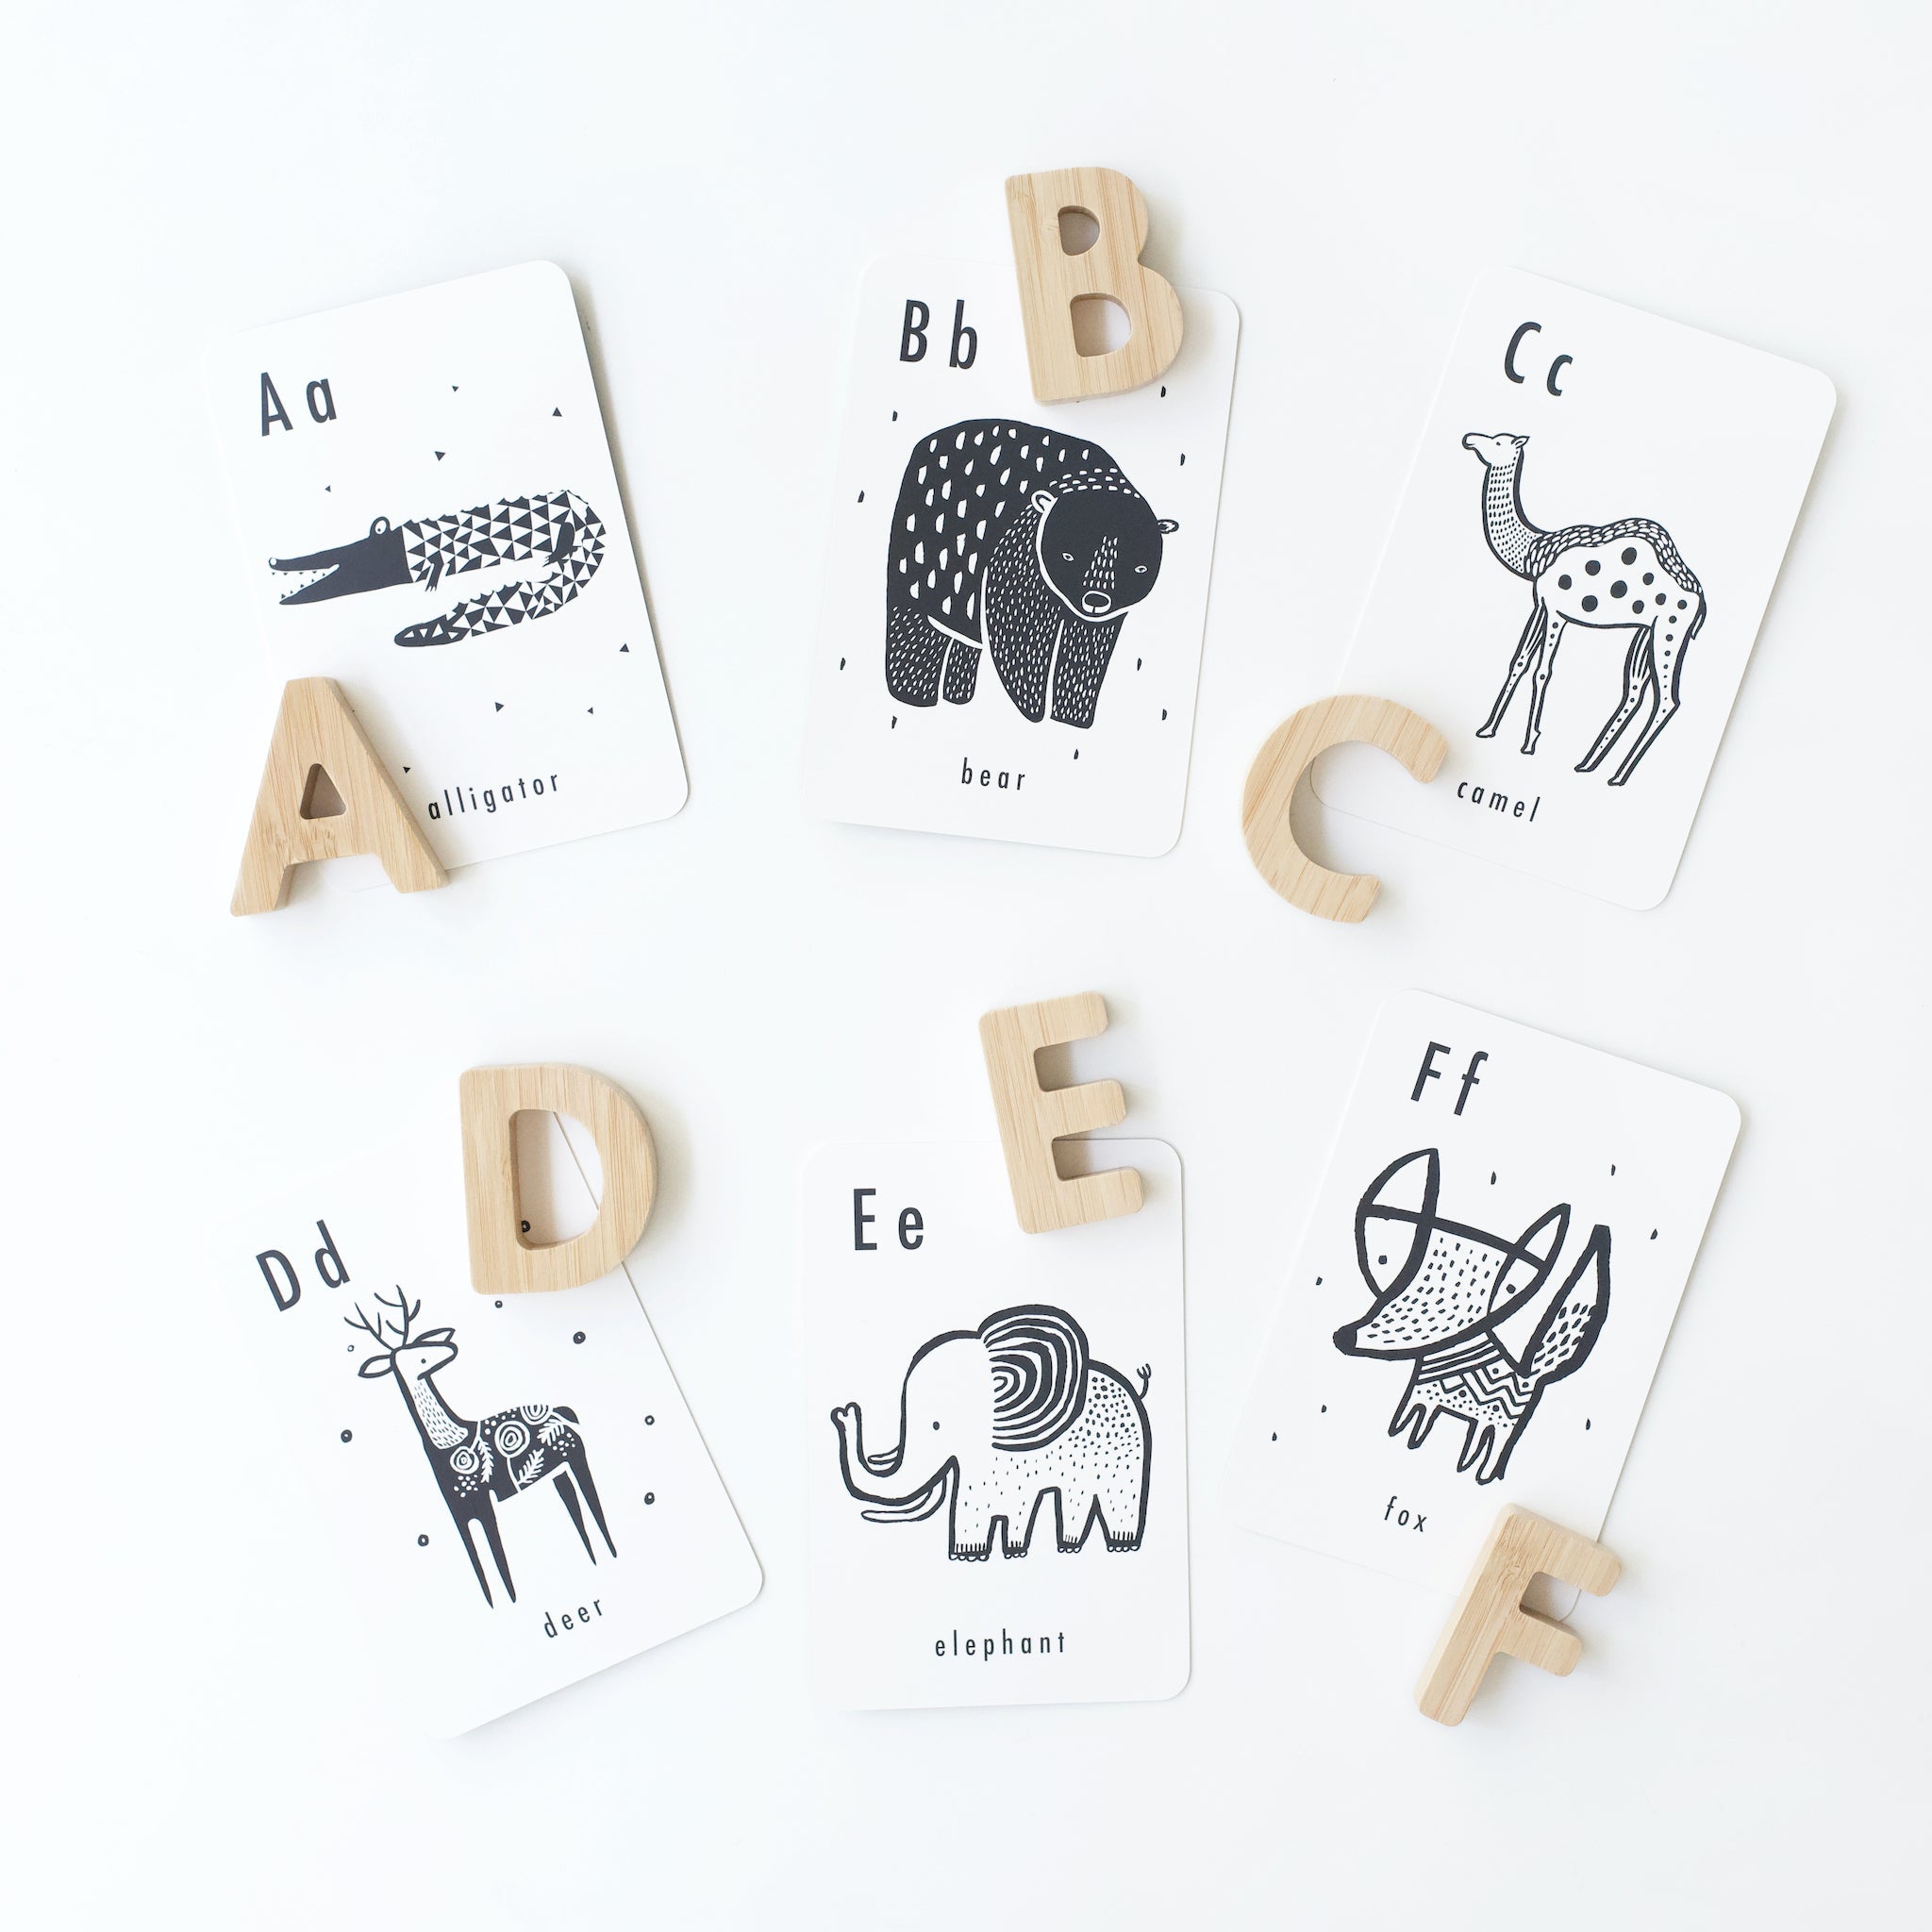 wooden-alphabet-with-animal-learning-cards-toddler-kids-games-2_abff5a9d-1153-428b-ac96-170112ffeb1d.jpg